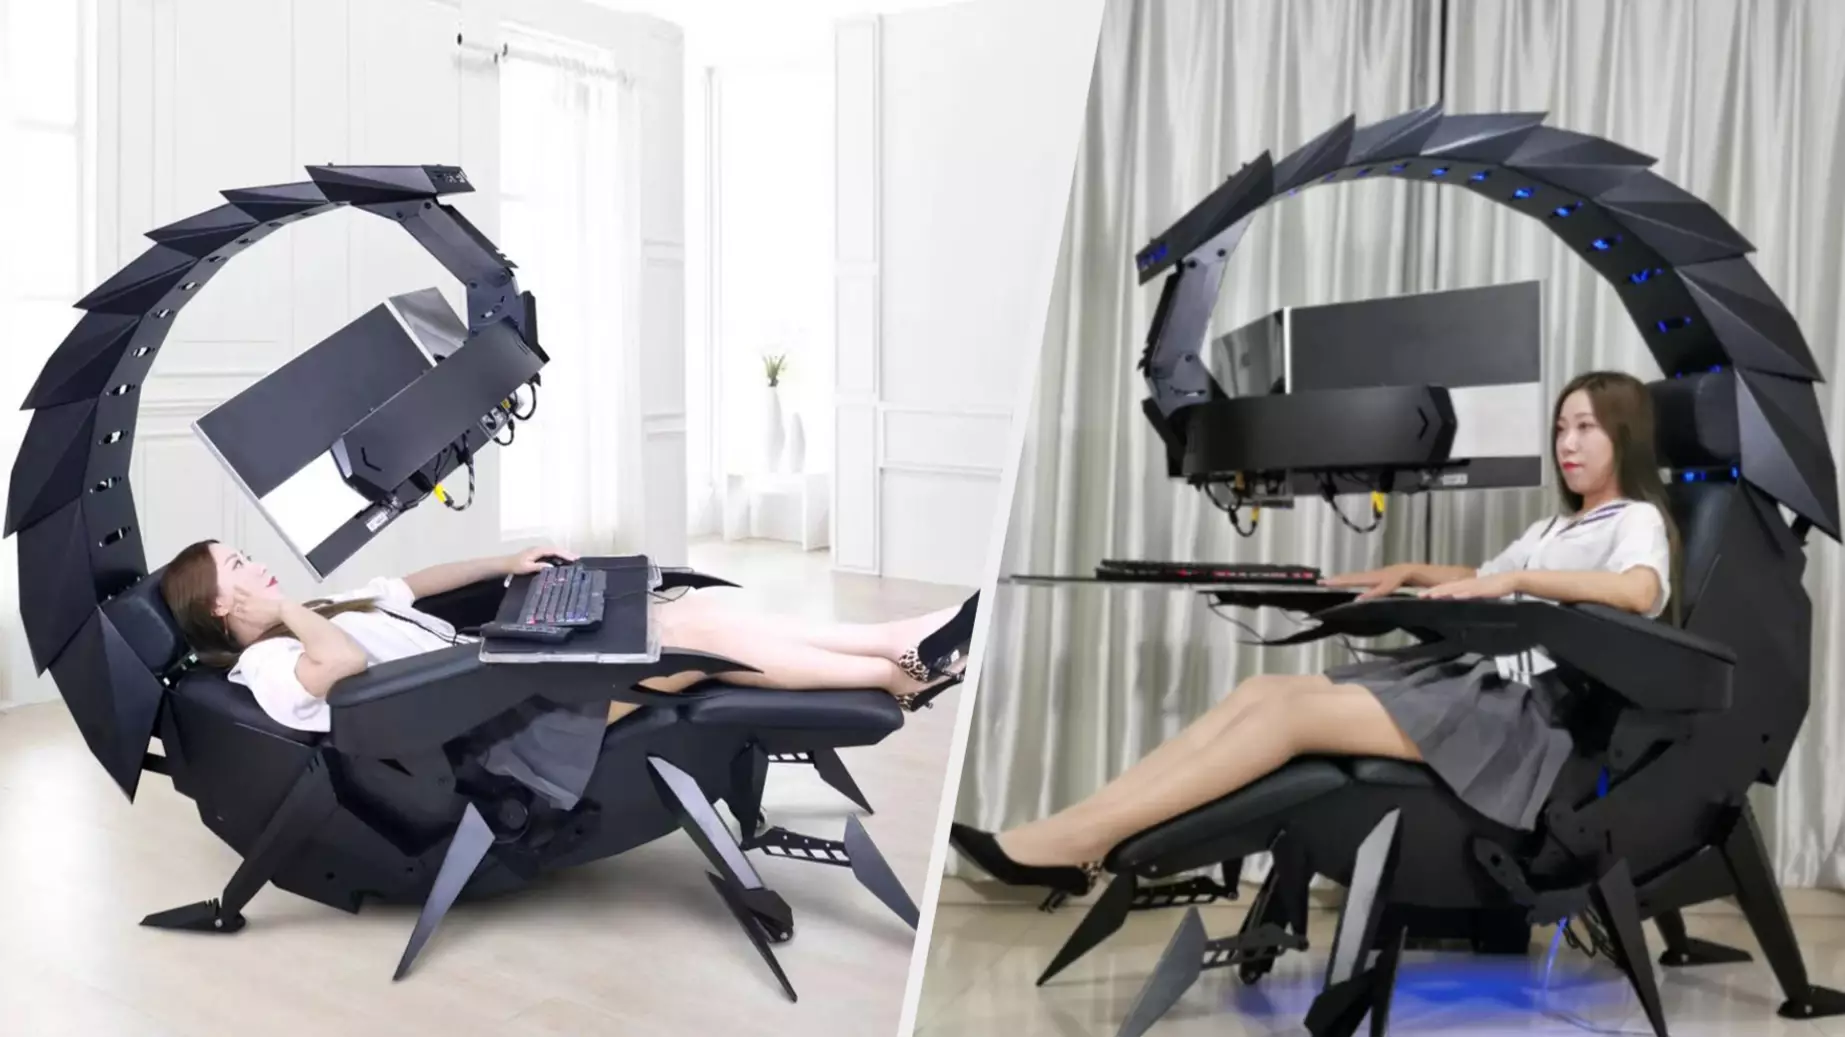 This Giant Scorpion PC Gaming Station Is An Absolute Monster